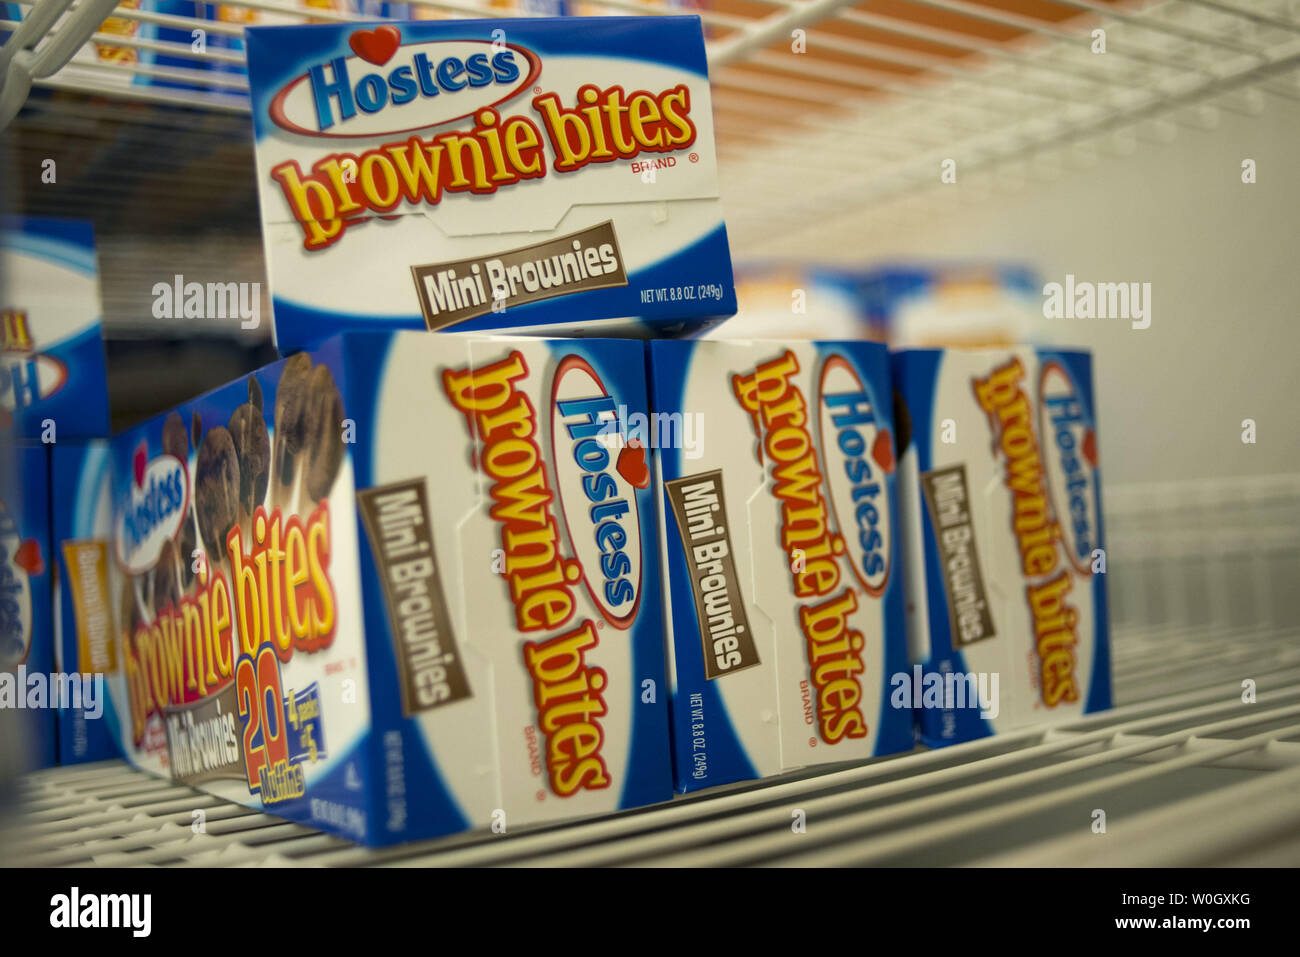 Hostess products are seen on a grocery store shelf in Silver Spring, Maryland on November 20, 2012. Hostess Brands, the maker of Twinkies, Ding Dongs, Wonder Bread and other baked goods, announced on November 9 it will shut down after it's Chapter 11 bankruptcy restructuring failed in the wake of a workers strike brought on by an imposed contract that would cut workers' wages by 8 percent.  UPI/Kevin Dietsch Stock Photo